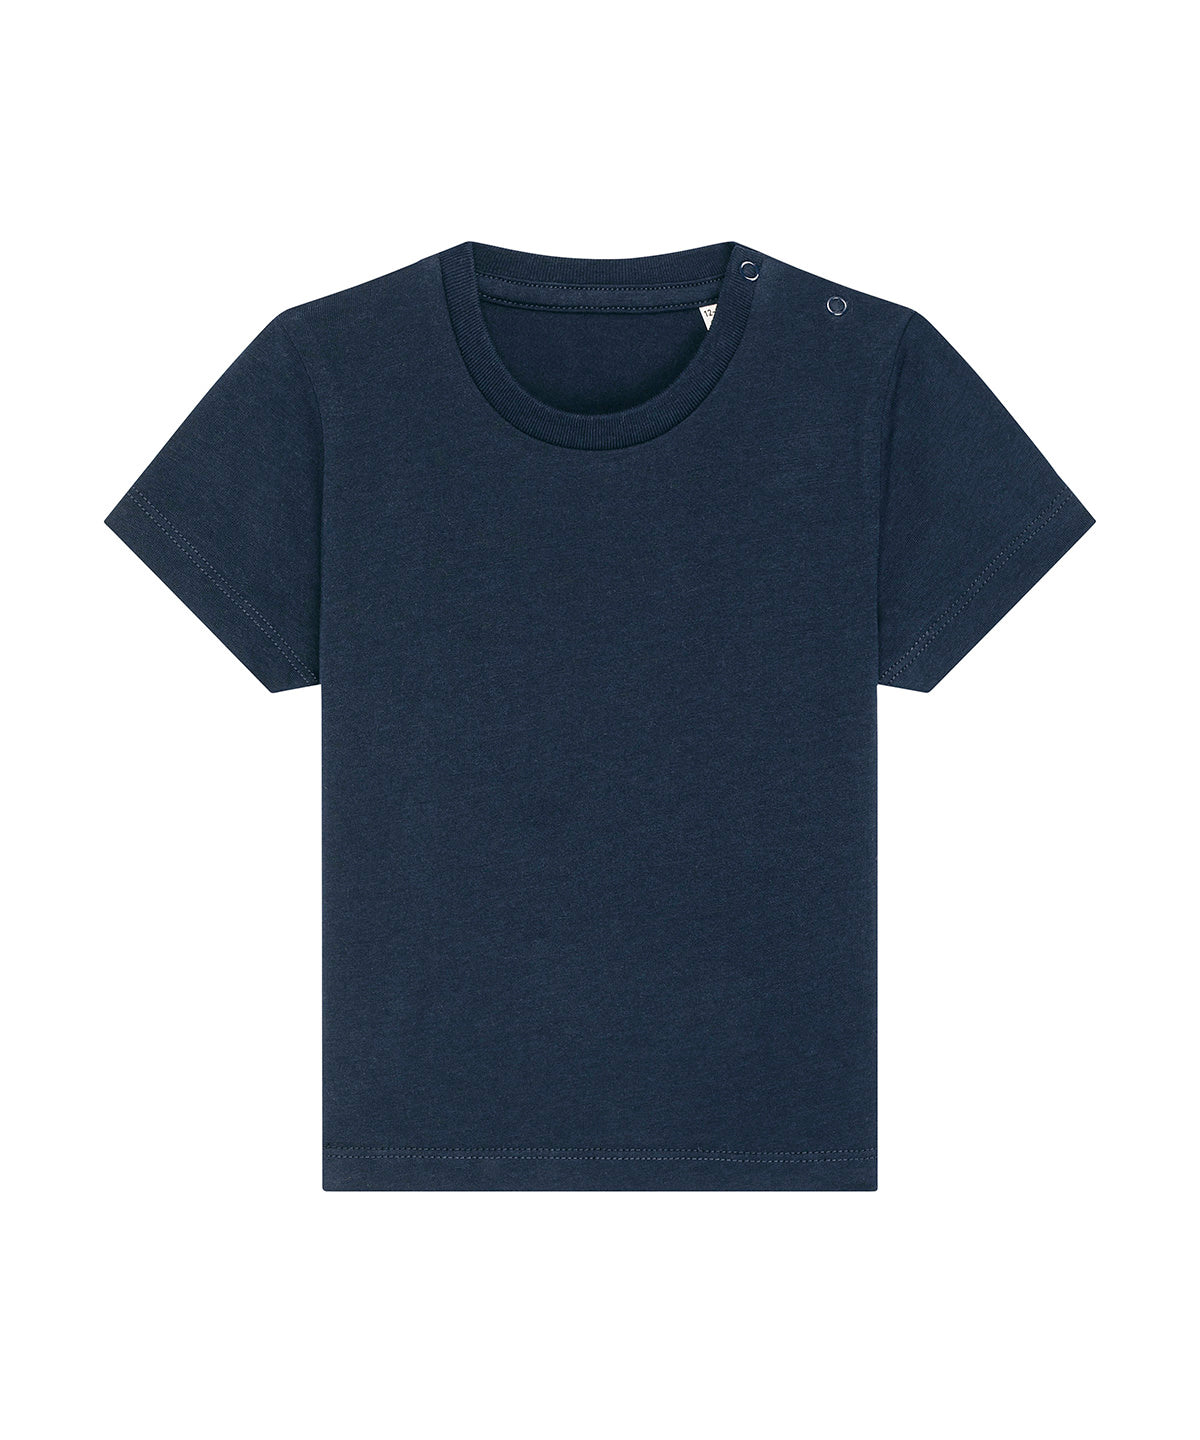 French Navy - Baby Creator iconic babies' t-shirt (STTB918) T-Shirts Stanley/Stella Baby & Toddler, Exclusives, New Colours for 2023, New Styles For 2022, Organic & Conscious, Stanley/ Stella, T-Shirts & Vests Schoolwear Centres